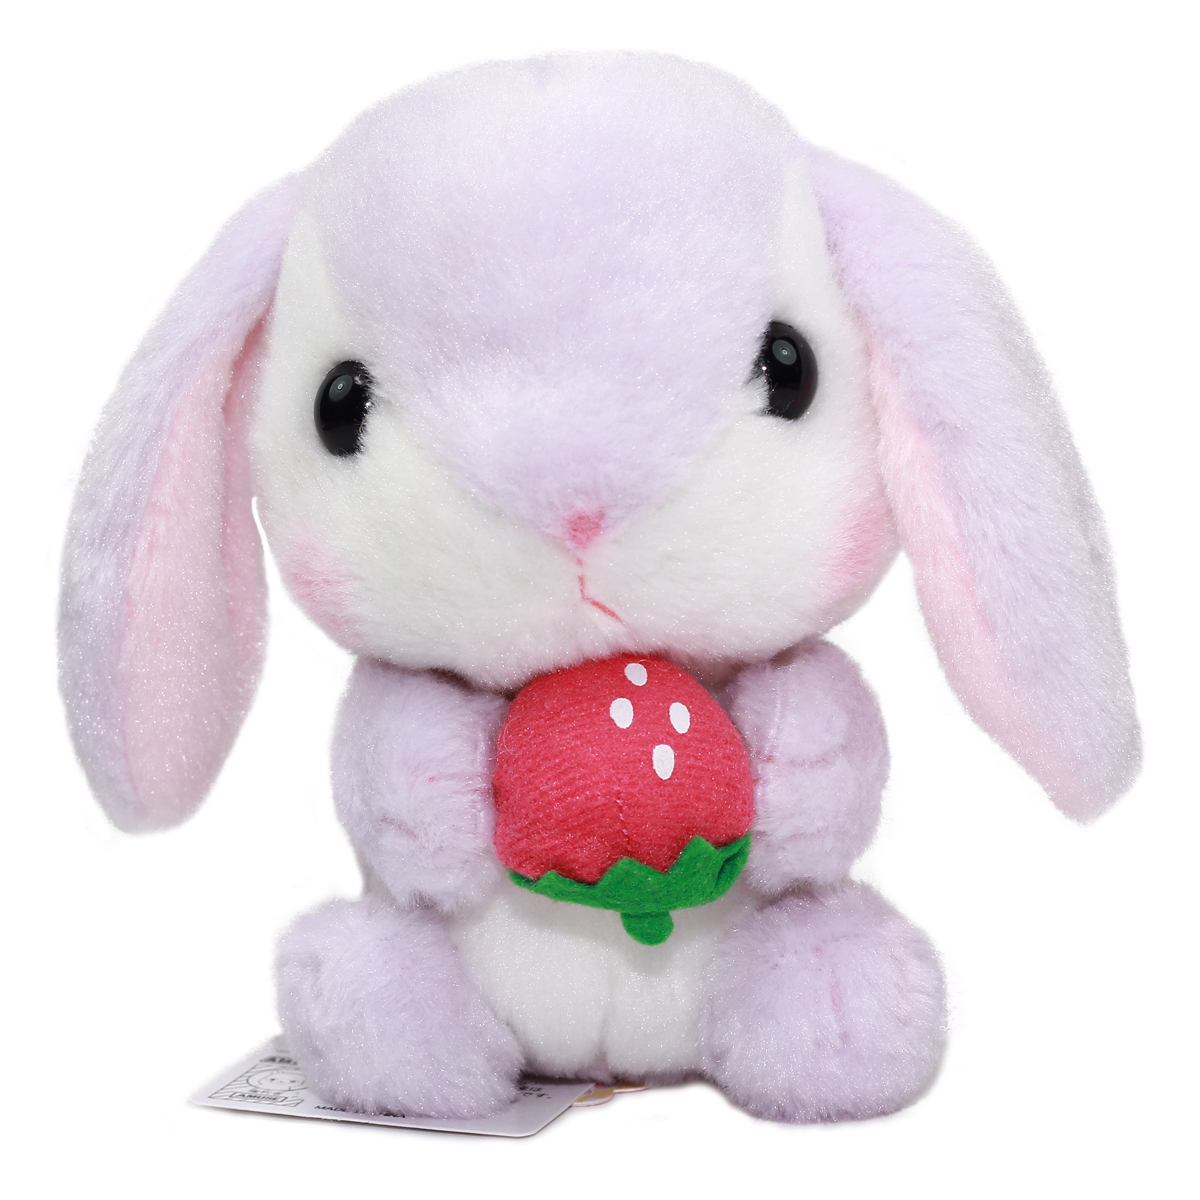 Amuse Bunny Plush Doll Sweet Garden Collection Cute Stuffed Animal Toy Purple/White 6 Inches